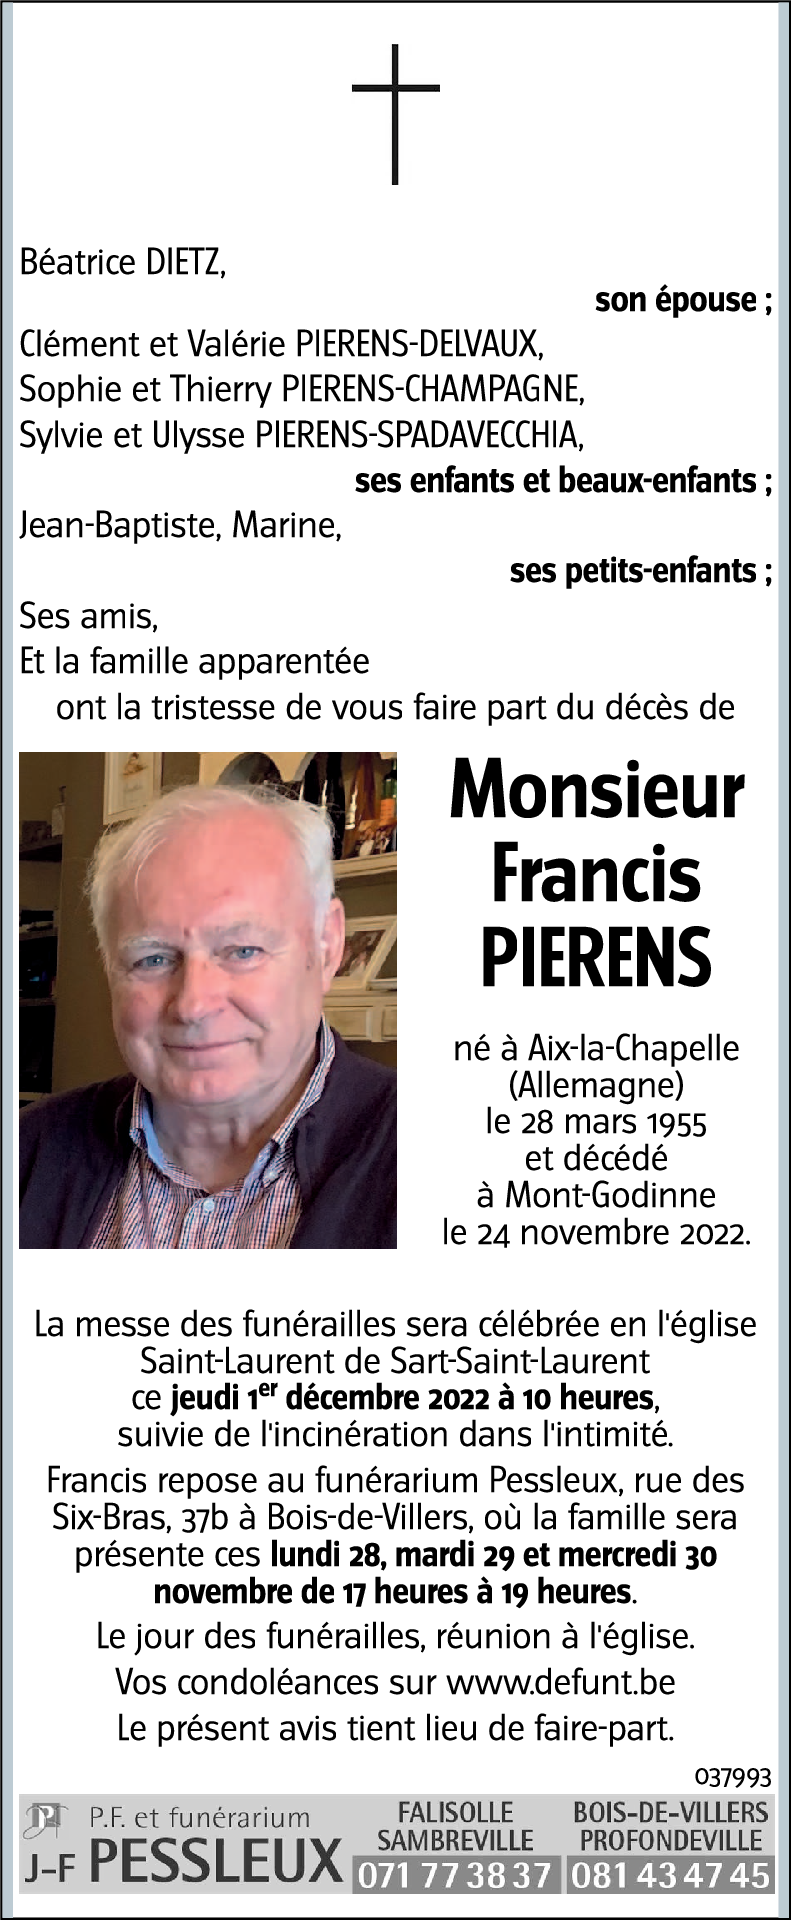 Francis PIERENS